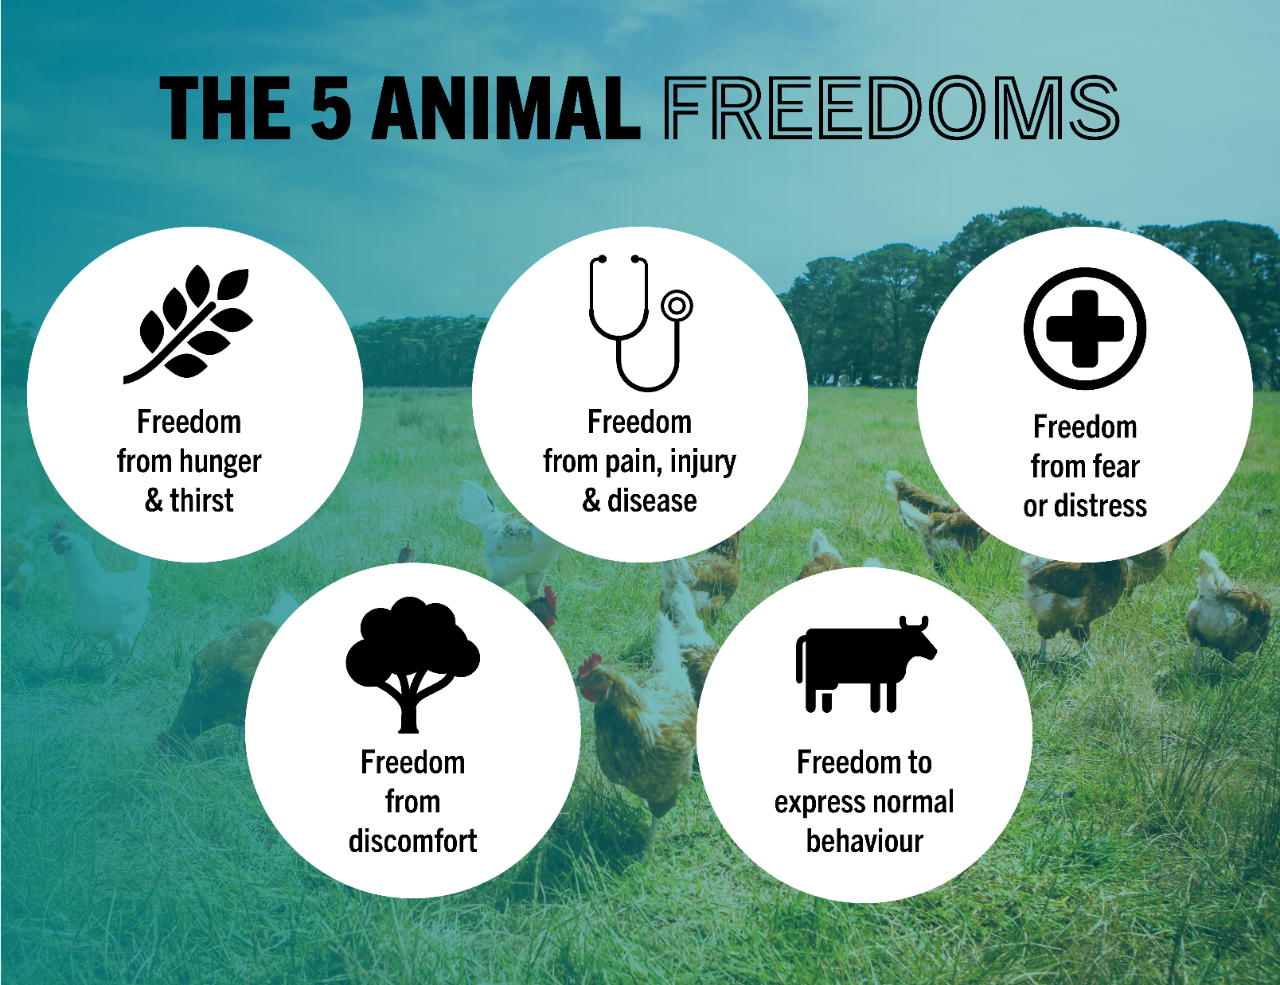 List of the 5 animal freedoms